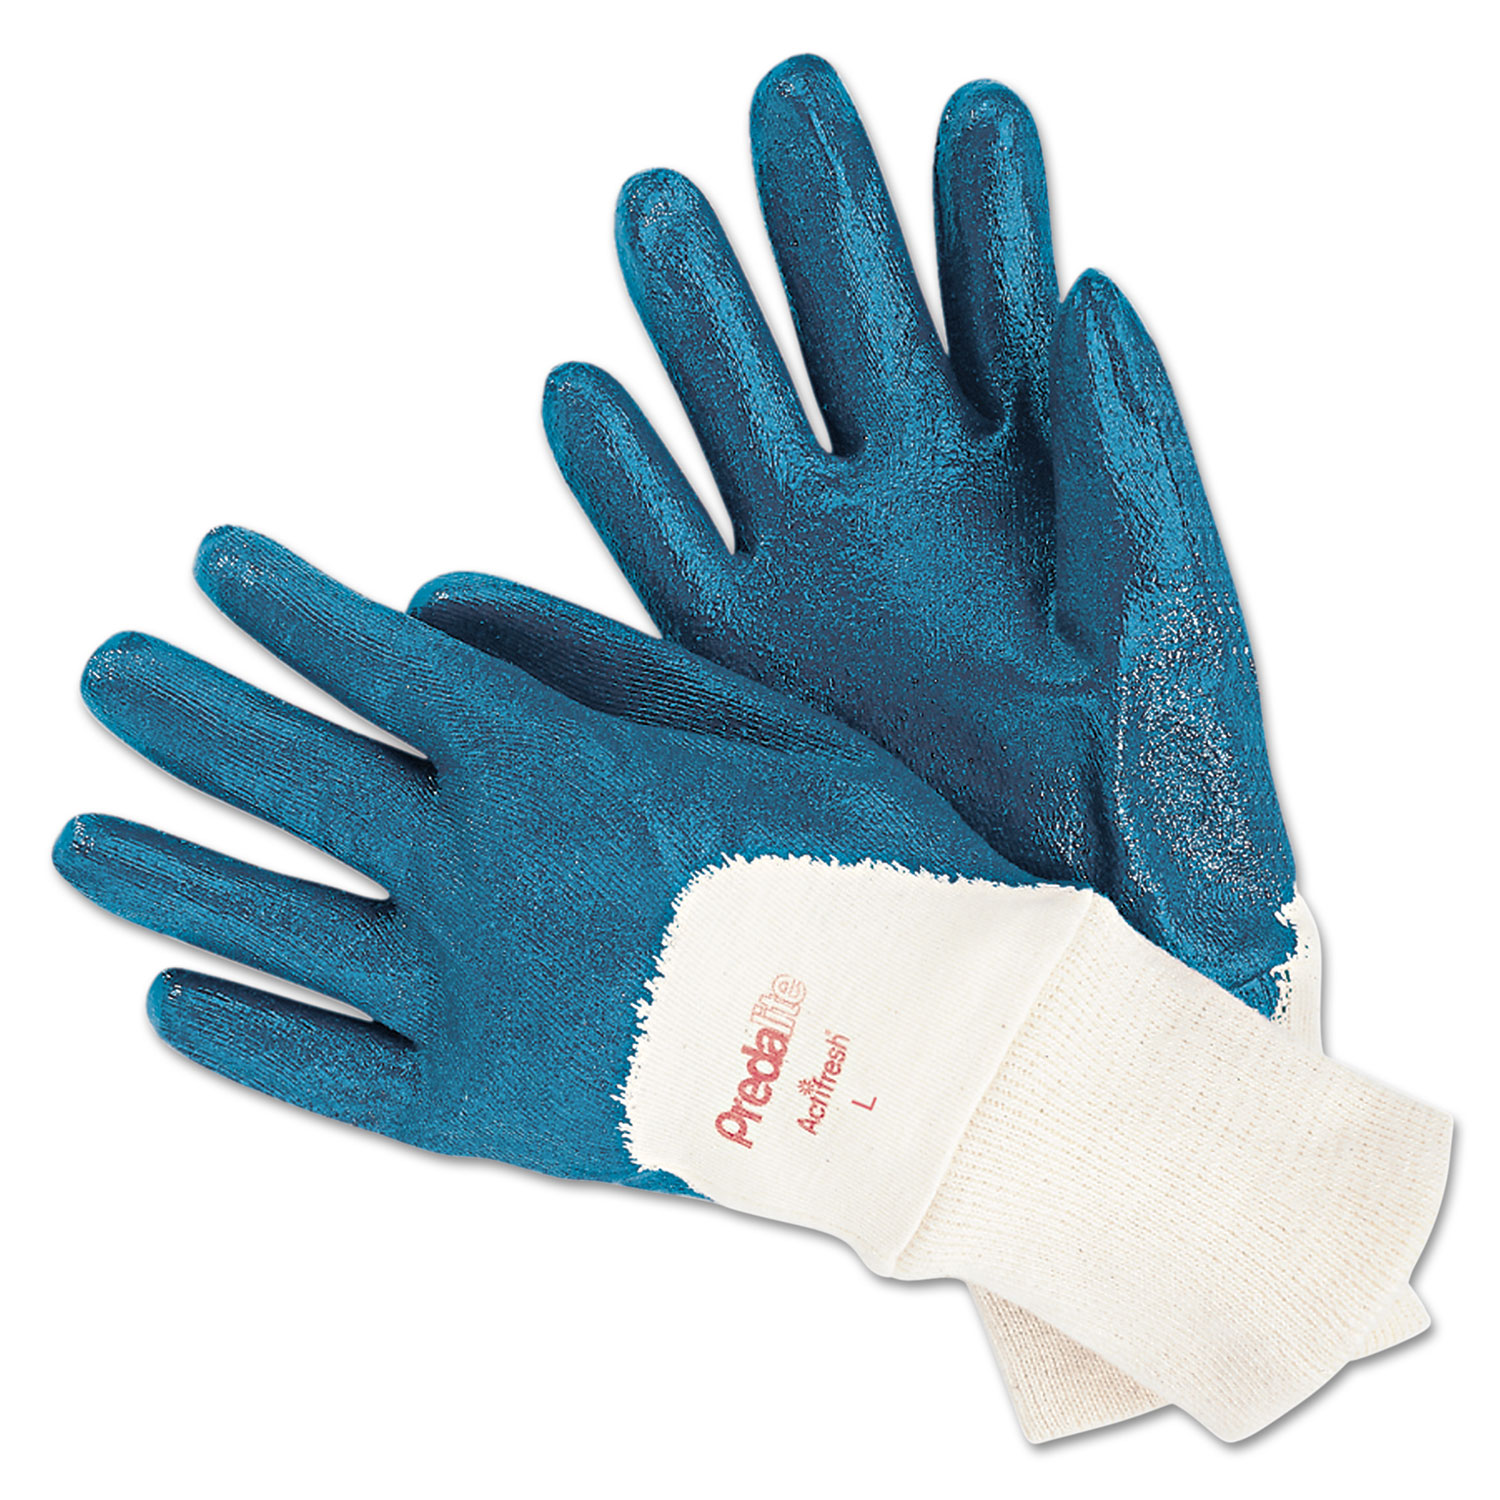  MCR Safety 127-9780L Predalite Nitrile Gloves, Cotton Lined, Blue/White, Large, 12 Pairs (MPG9780L) 